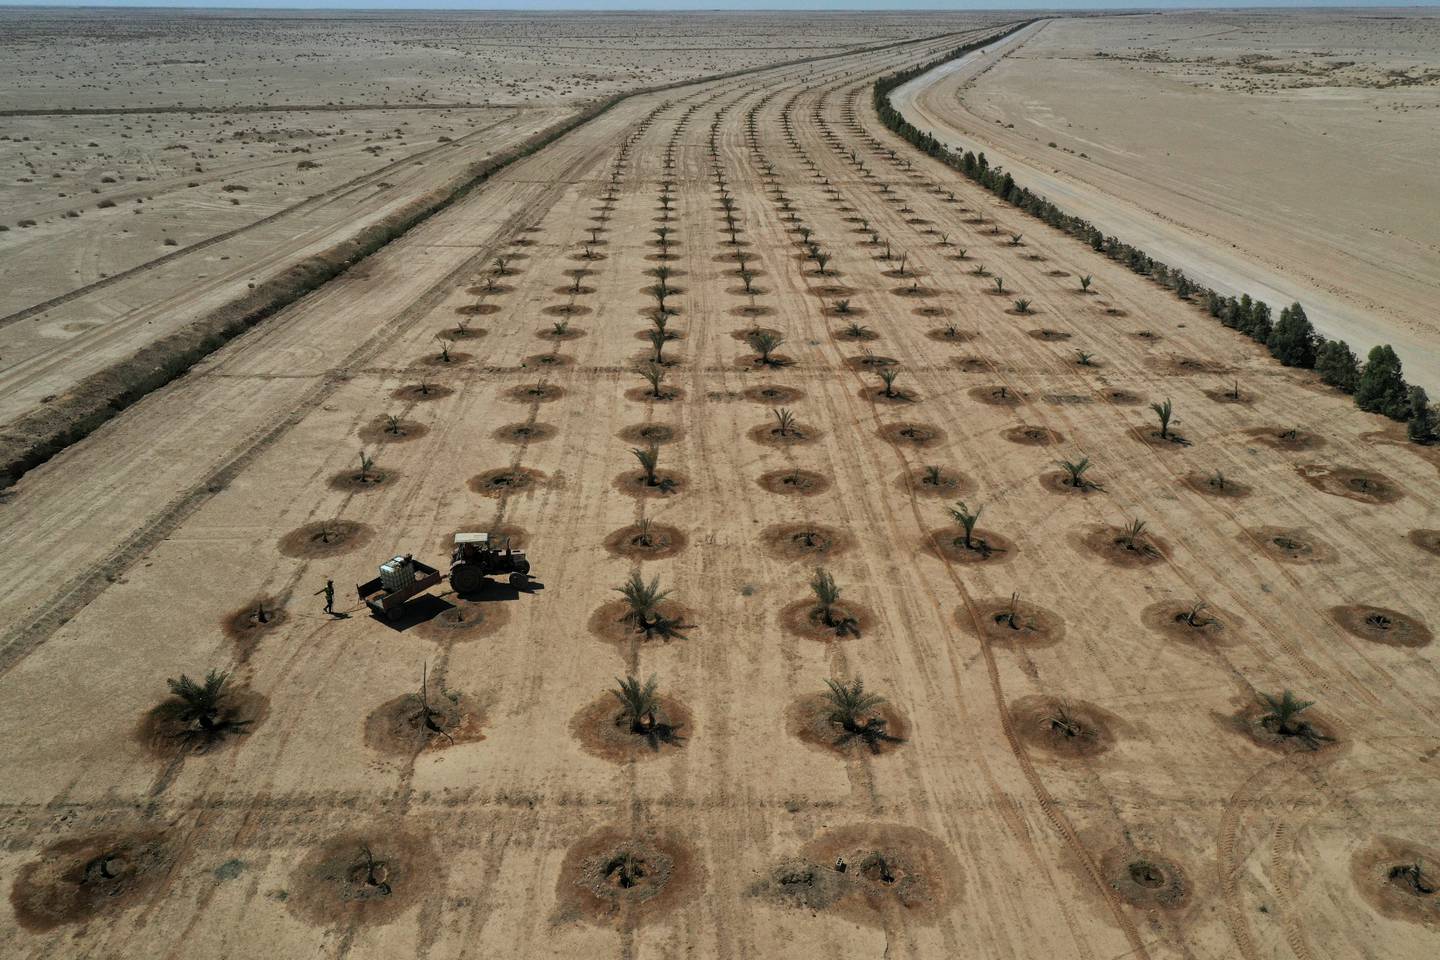 Trees are planted to form a "green belt" around the Iraqi city of Karbala as part of an initiative to tackle desertification and sand storms. Reuters